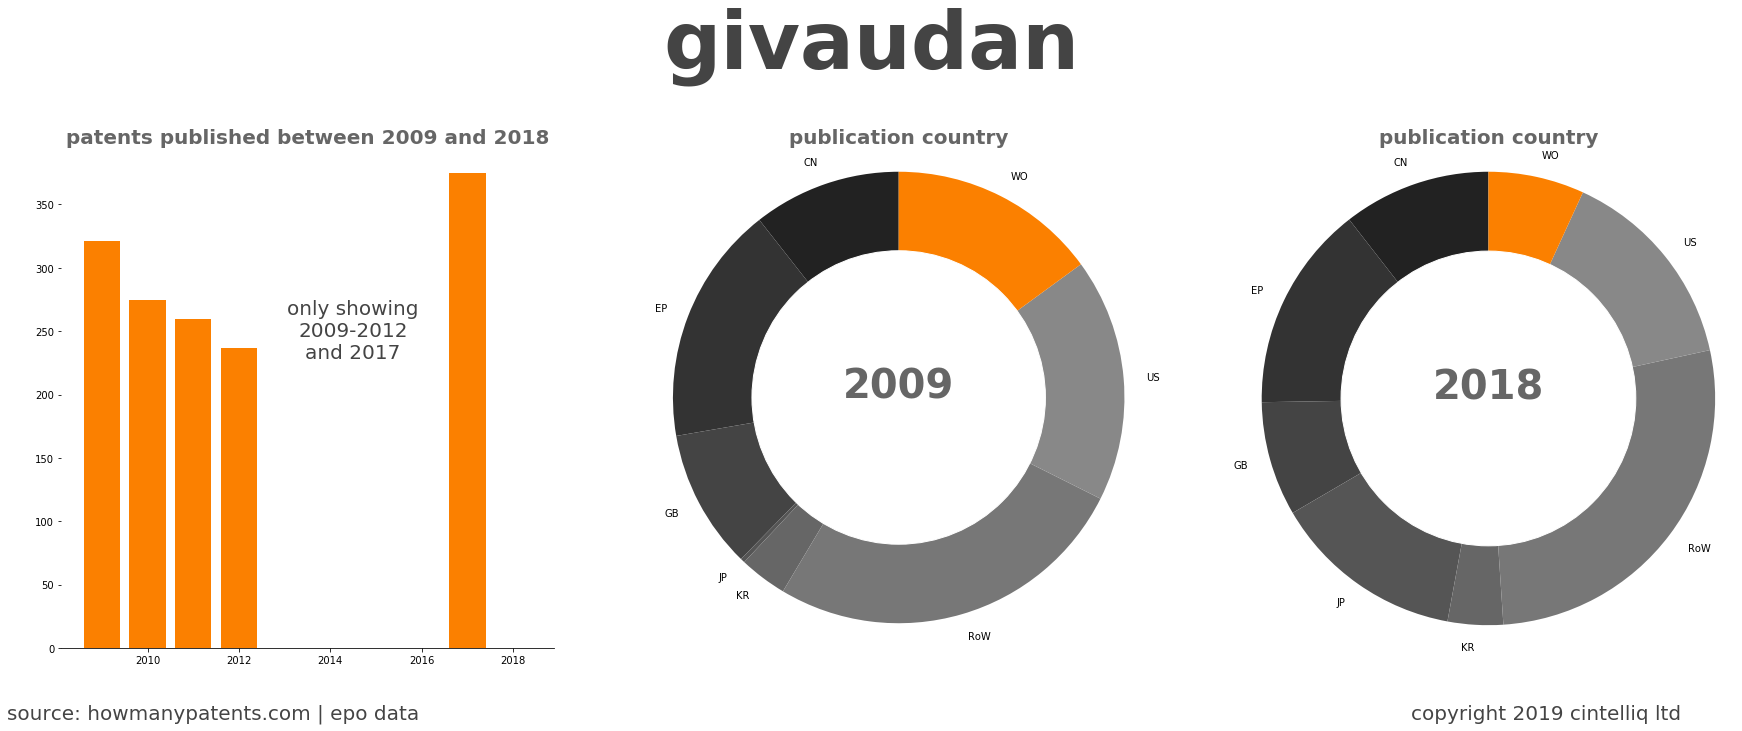 summary of patents for Givaudan